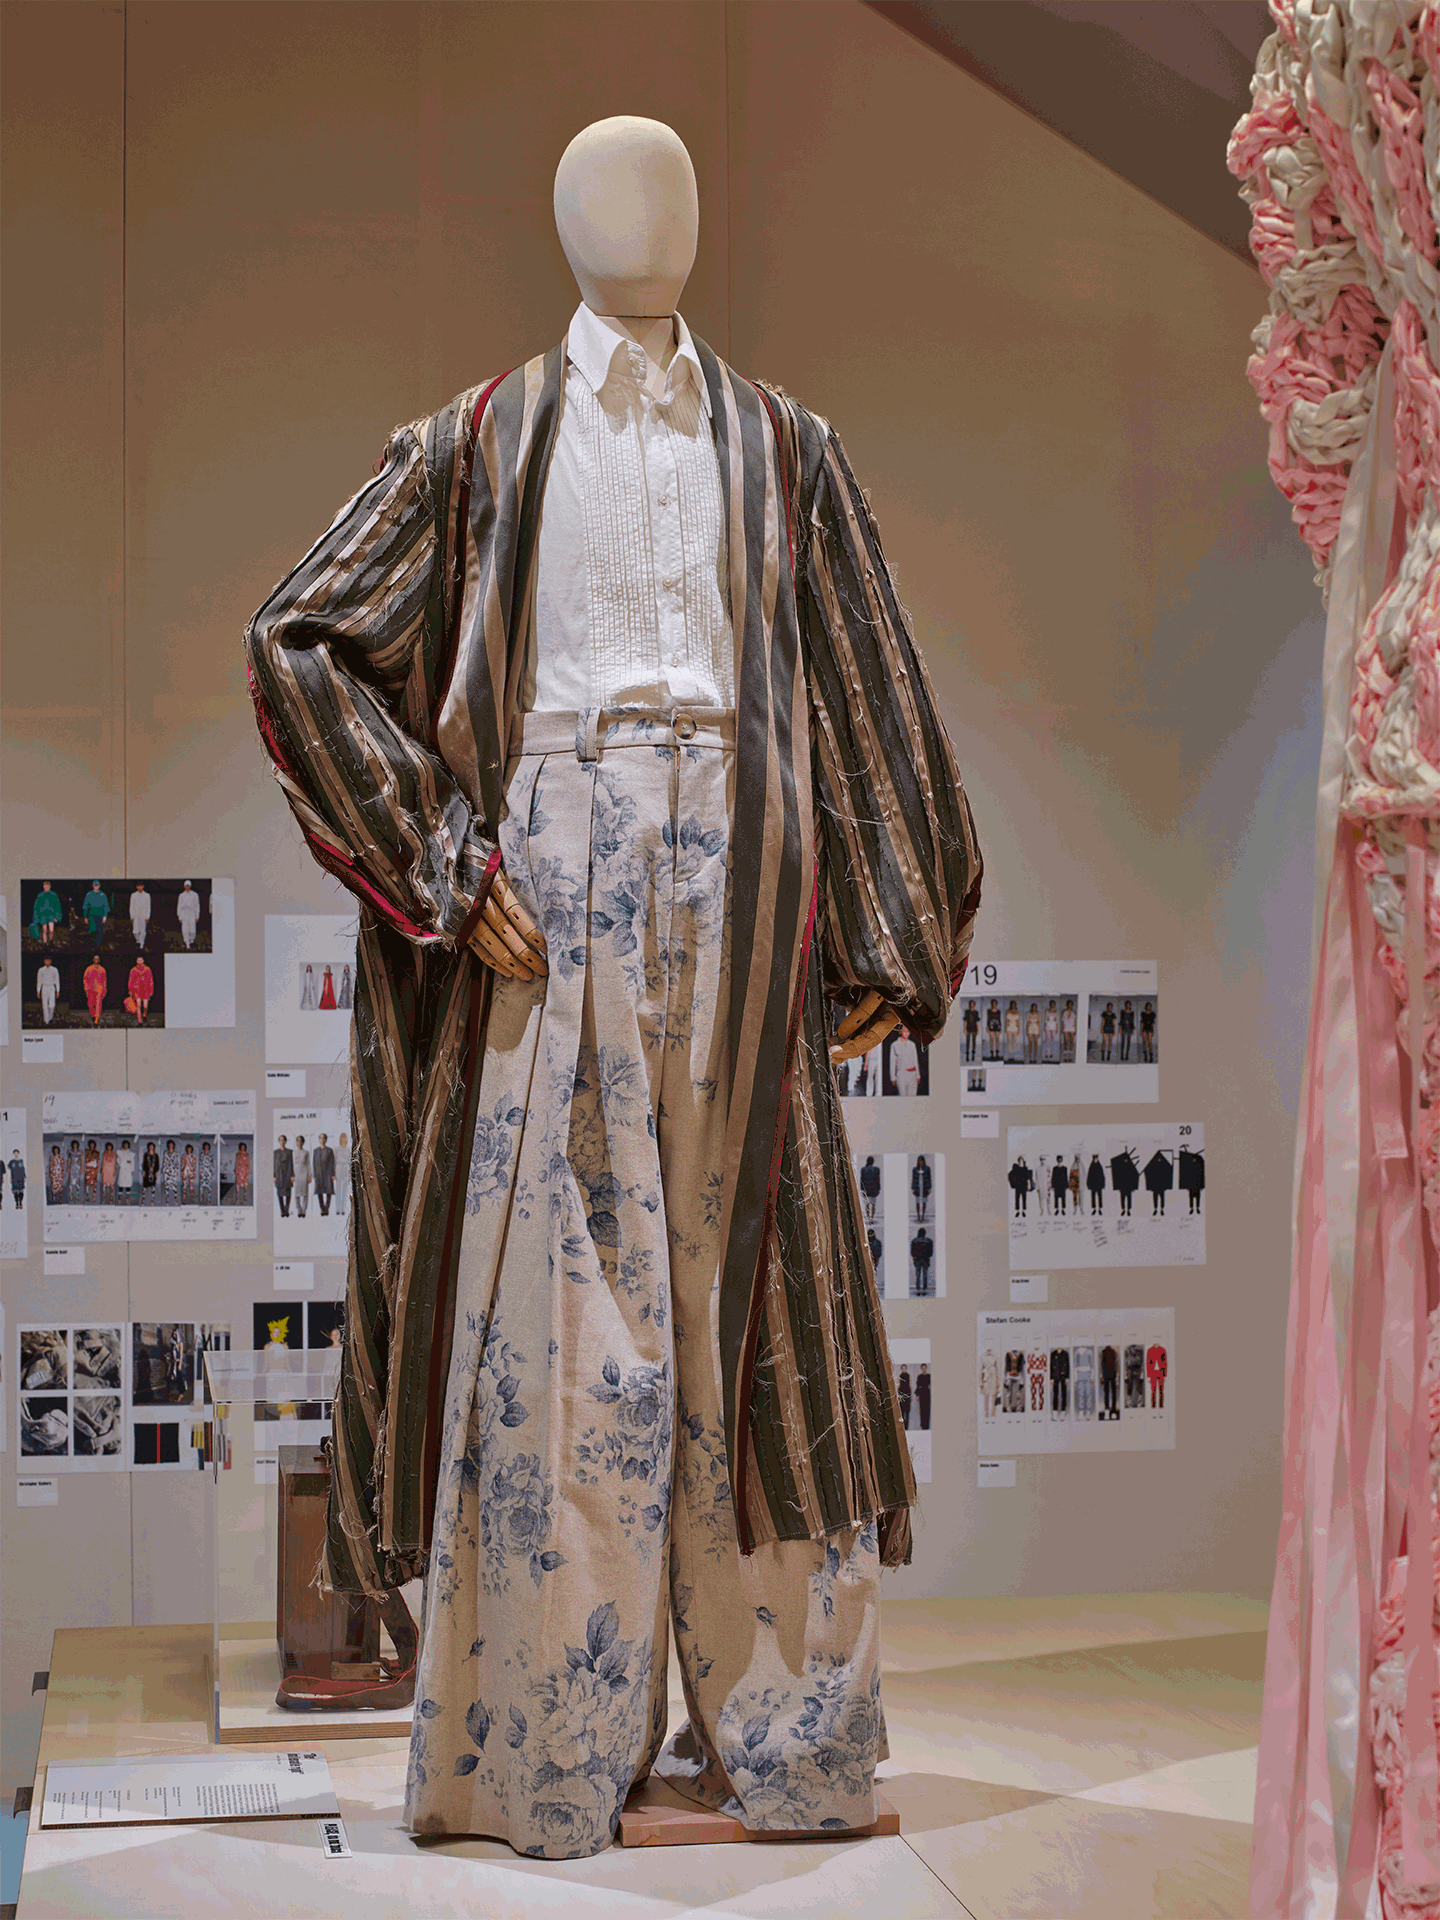 The SS Daley ensemble from his Graduate Collection, featuring the trousers worn by Harry Styles in his 'Golden' video, on display at ‘Rebel: 30 Years of London Fashion’, the exhibition sponsored by Alexander McQueen. Photograph by Andy Stagg. Image Courtesy of The Design Museum